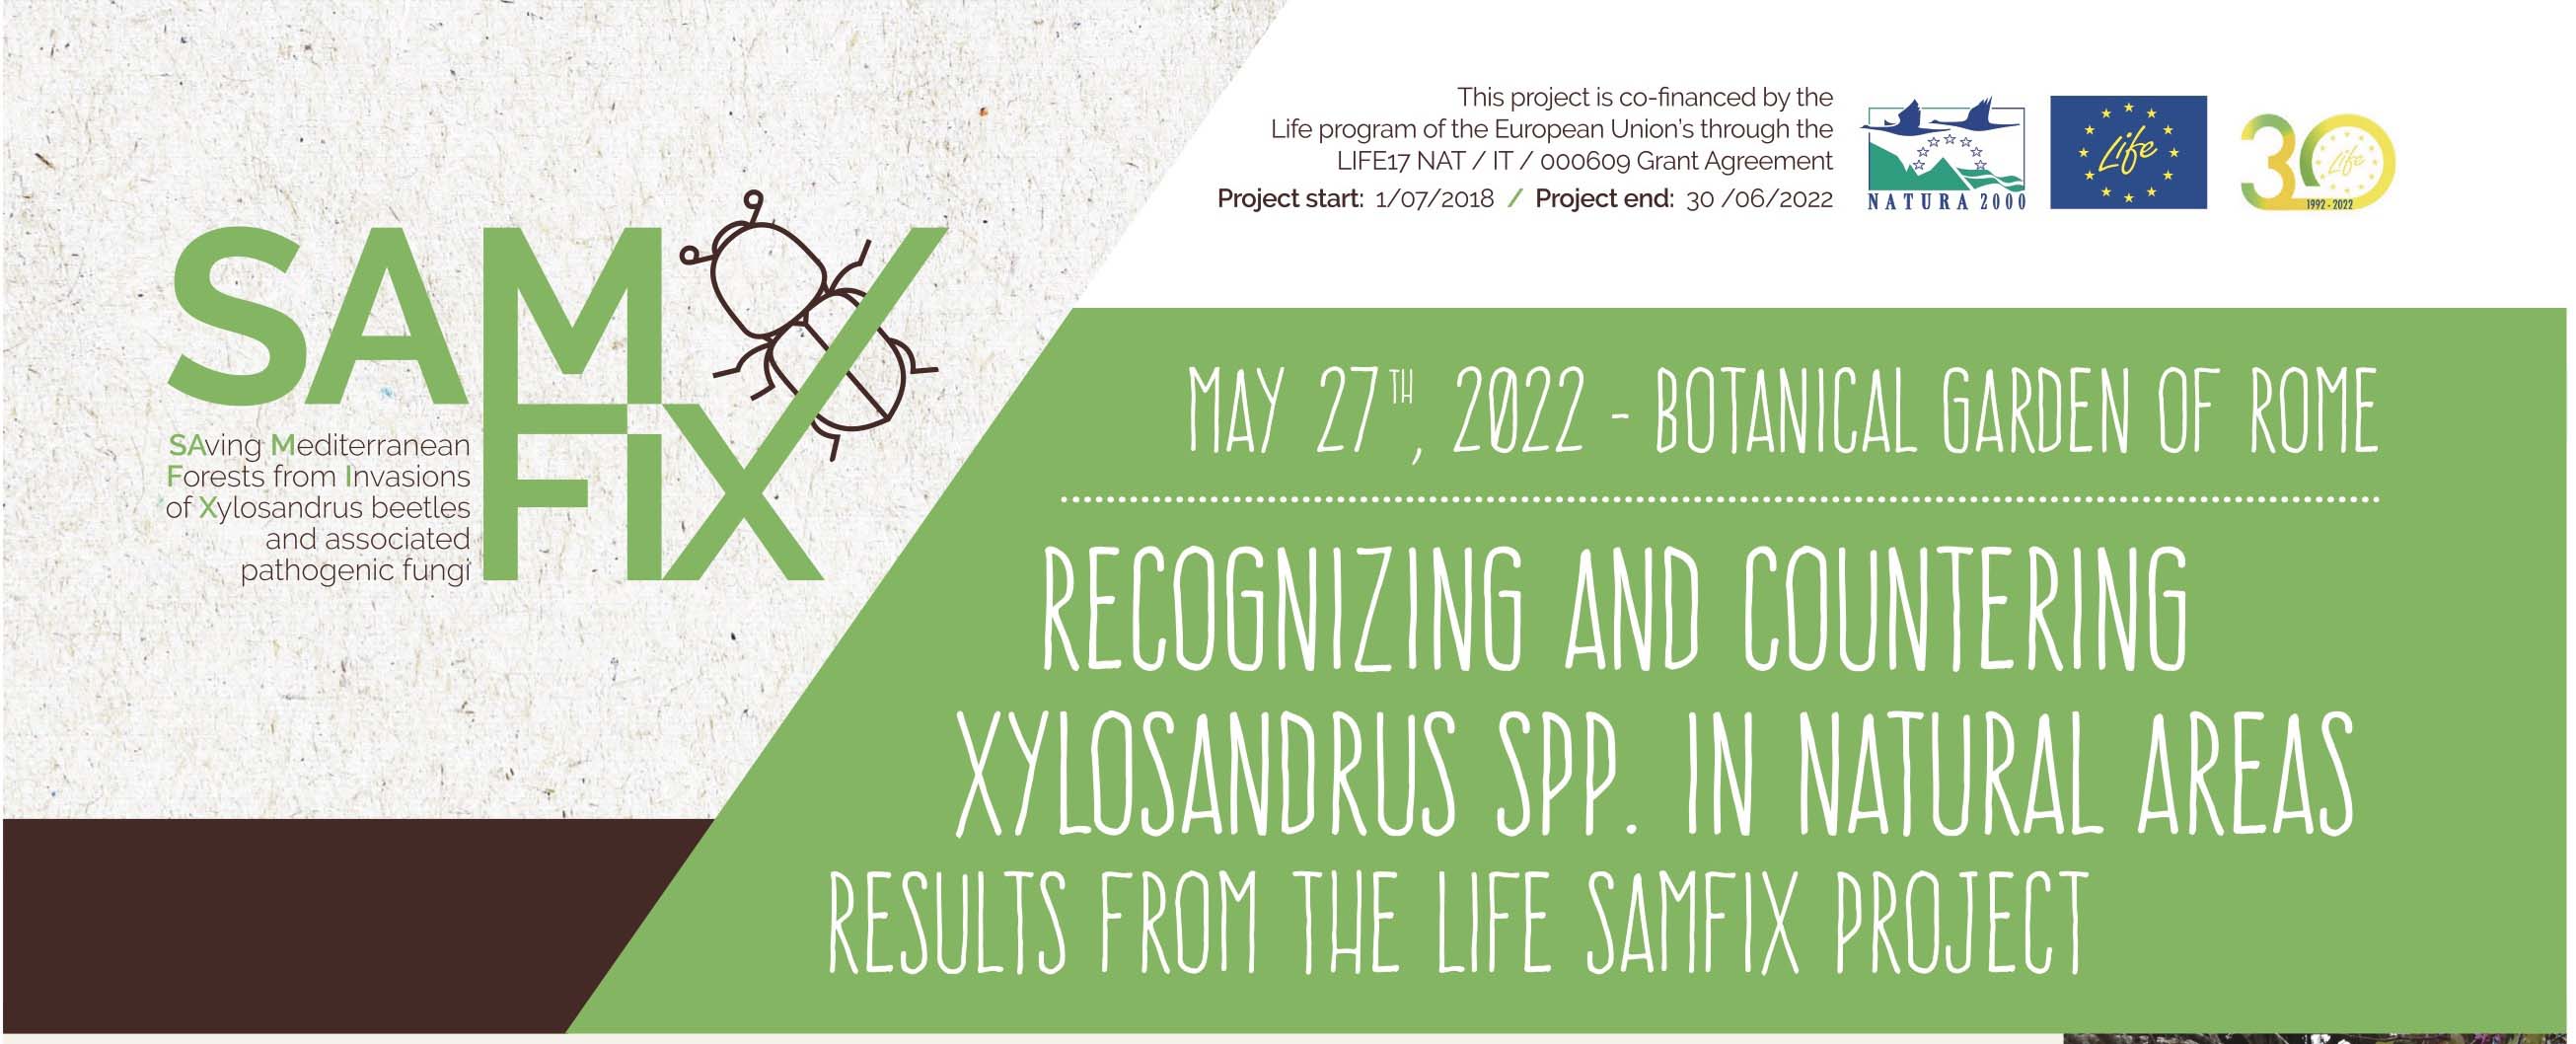 Recognizing and countering Xylosandrus spp. in natural areas: results from the LIFE SAMFIX project